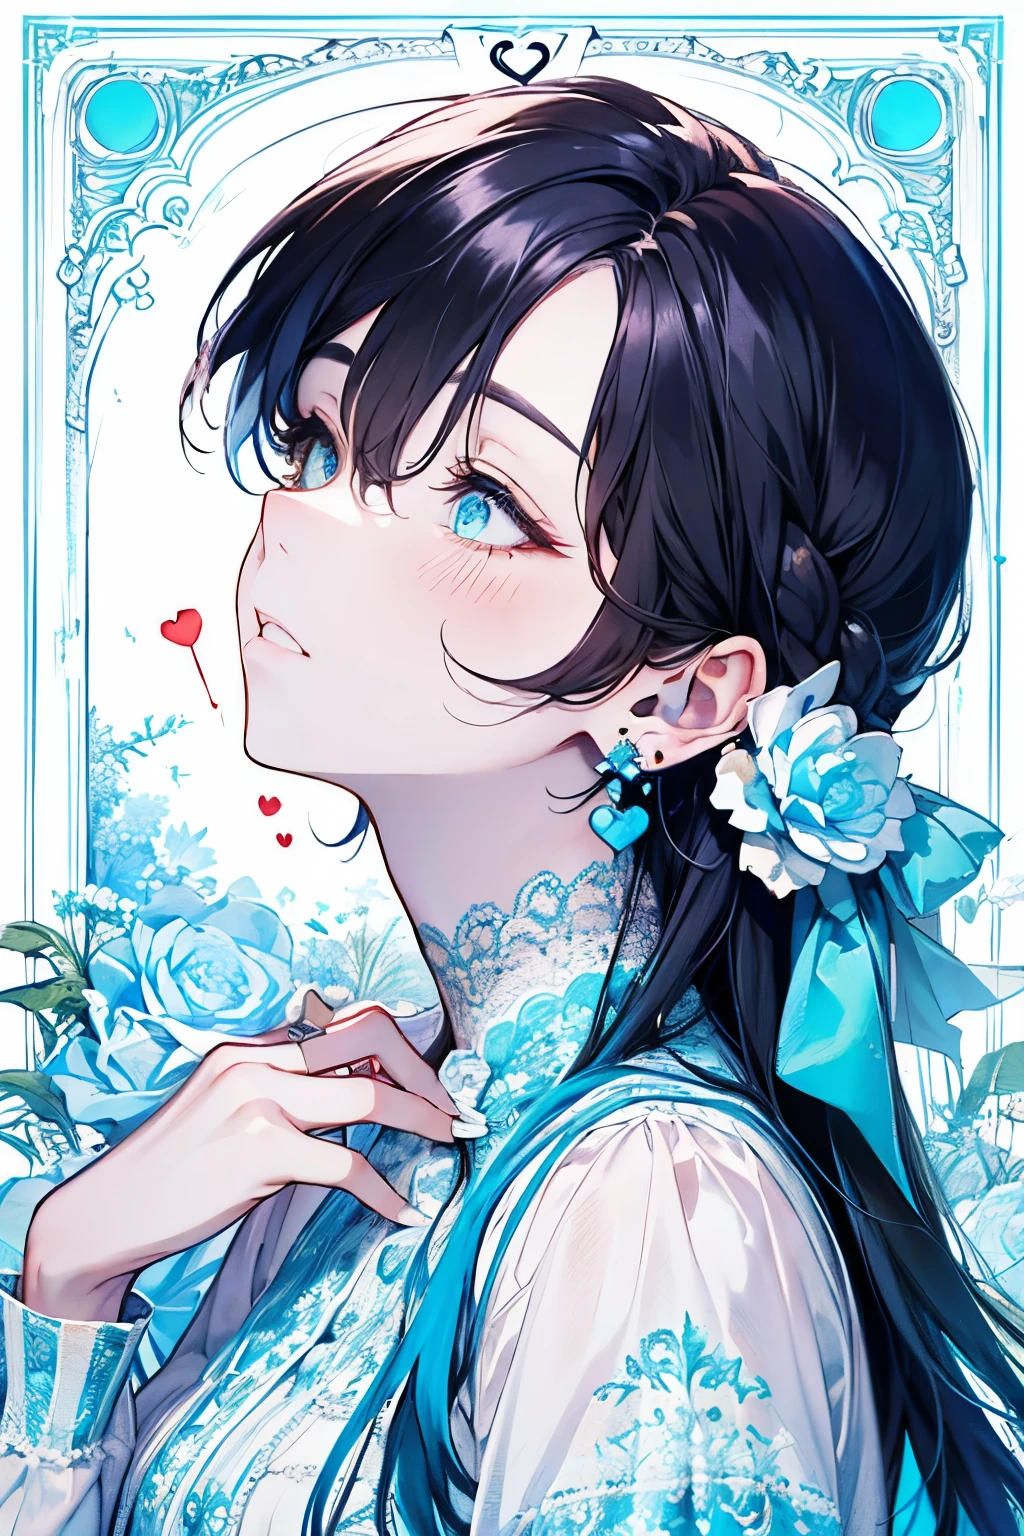 ((17years old man:1.2)), masterpiece, best quality, braid hair, black hair, (half up and half down hair:1.1),(portrait),white wedding dress,(pop and cute flower pattern background), (perfect hands),(Light blue,yellow,white),looking front,((Large and gorgeous earrings:1.1)),(With eyes closed, waiting for a kiss:1.35),((hand to own mouth:1.2)),((upper body)),((Looking up:1.2)),((heart:1.2))